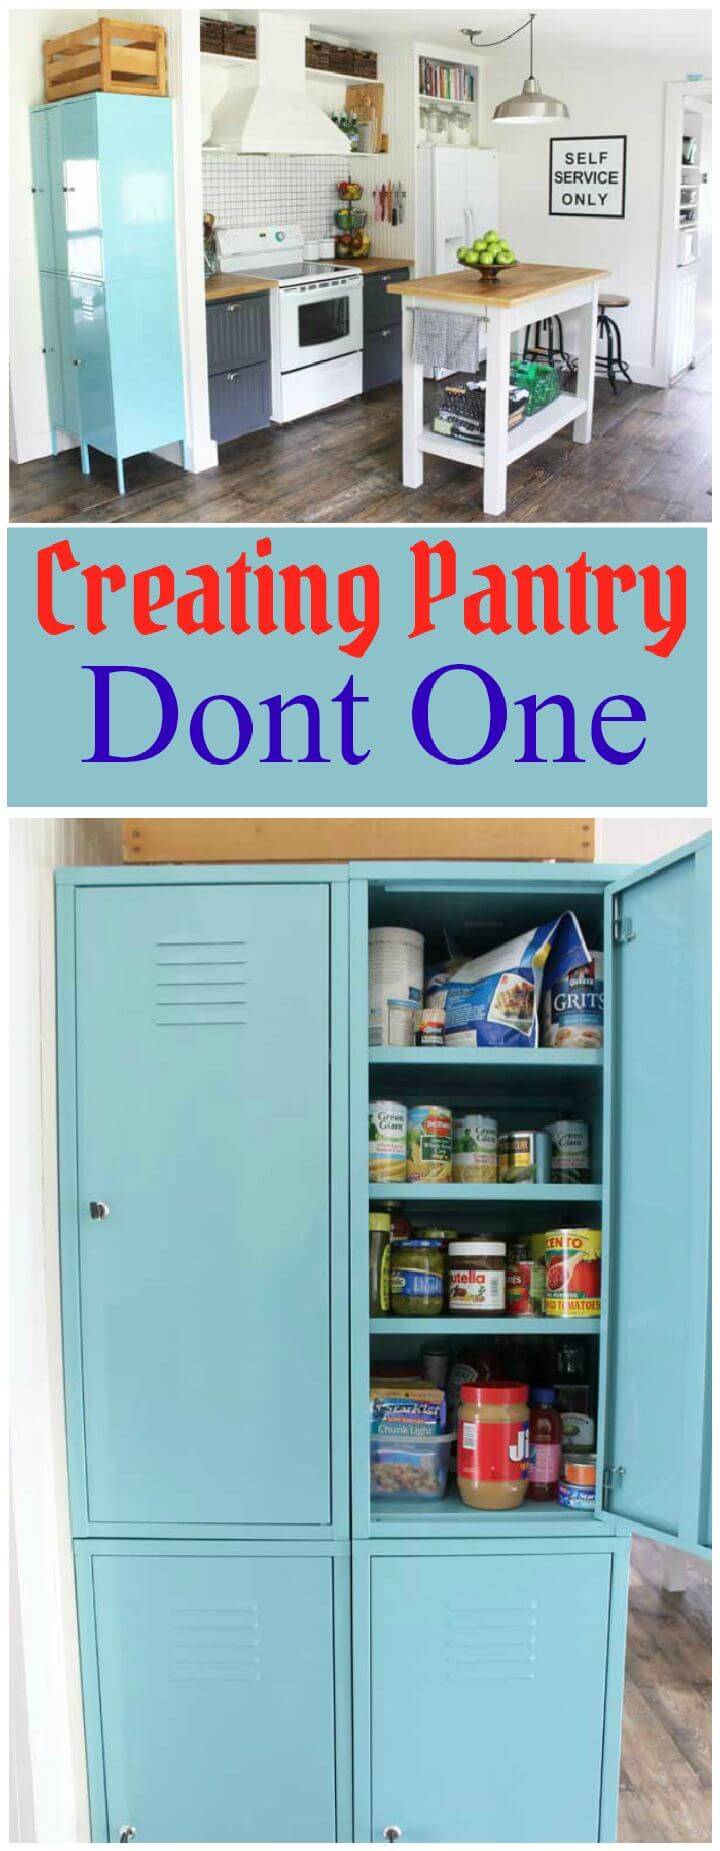 Creating Pantry Dont One